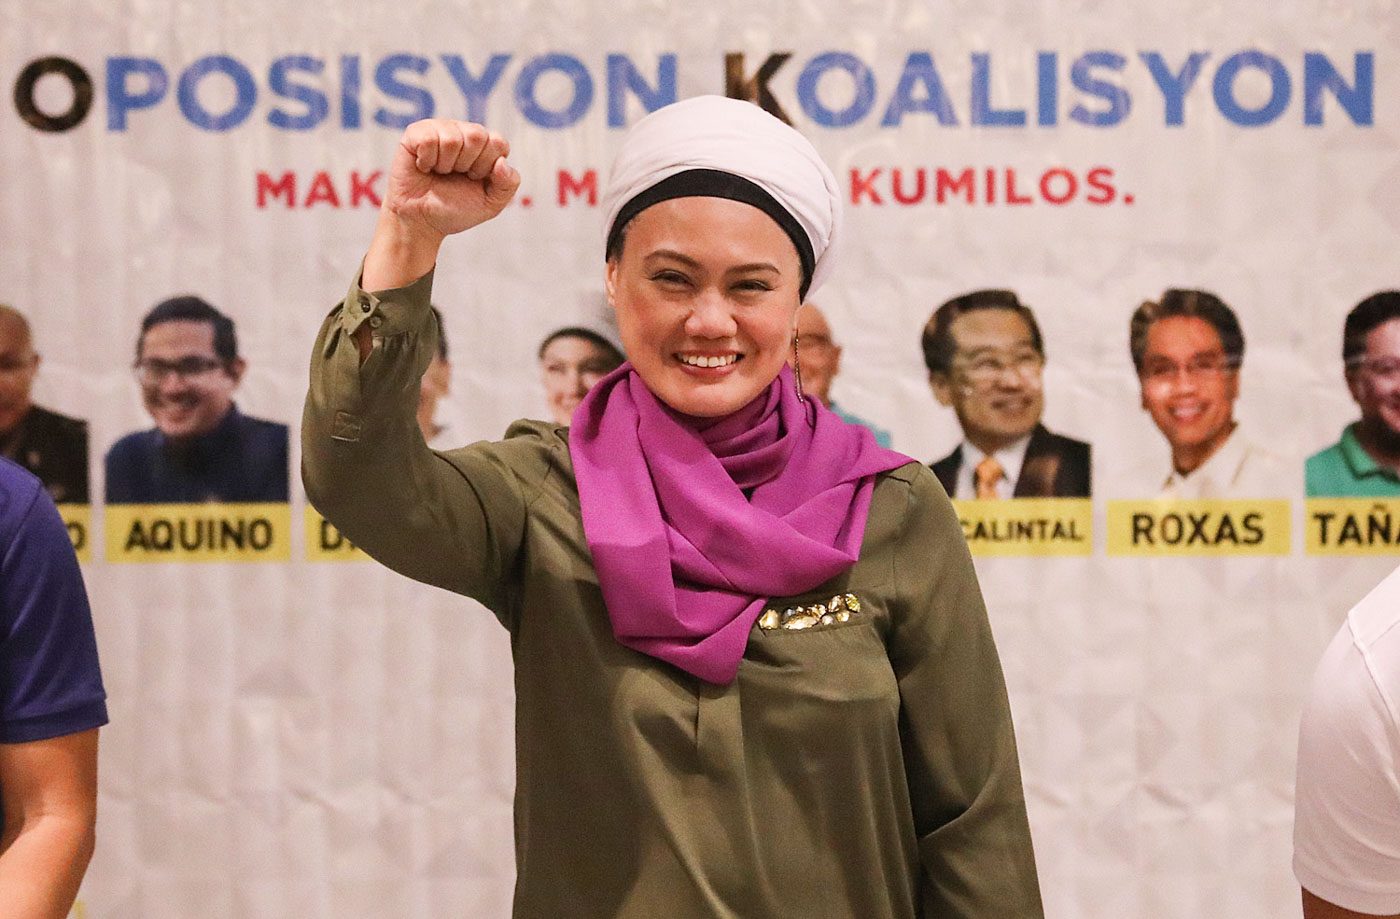 THE MARANAO FIGHTER. Samira Gutoc is a respected civic leader in war-torn Marawi City. Photo by Darren Langit/Rappler    